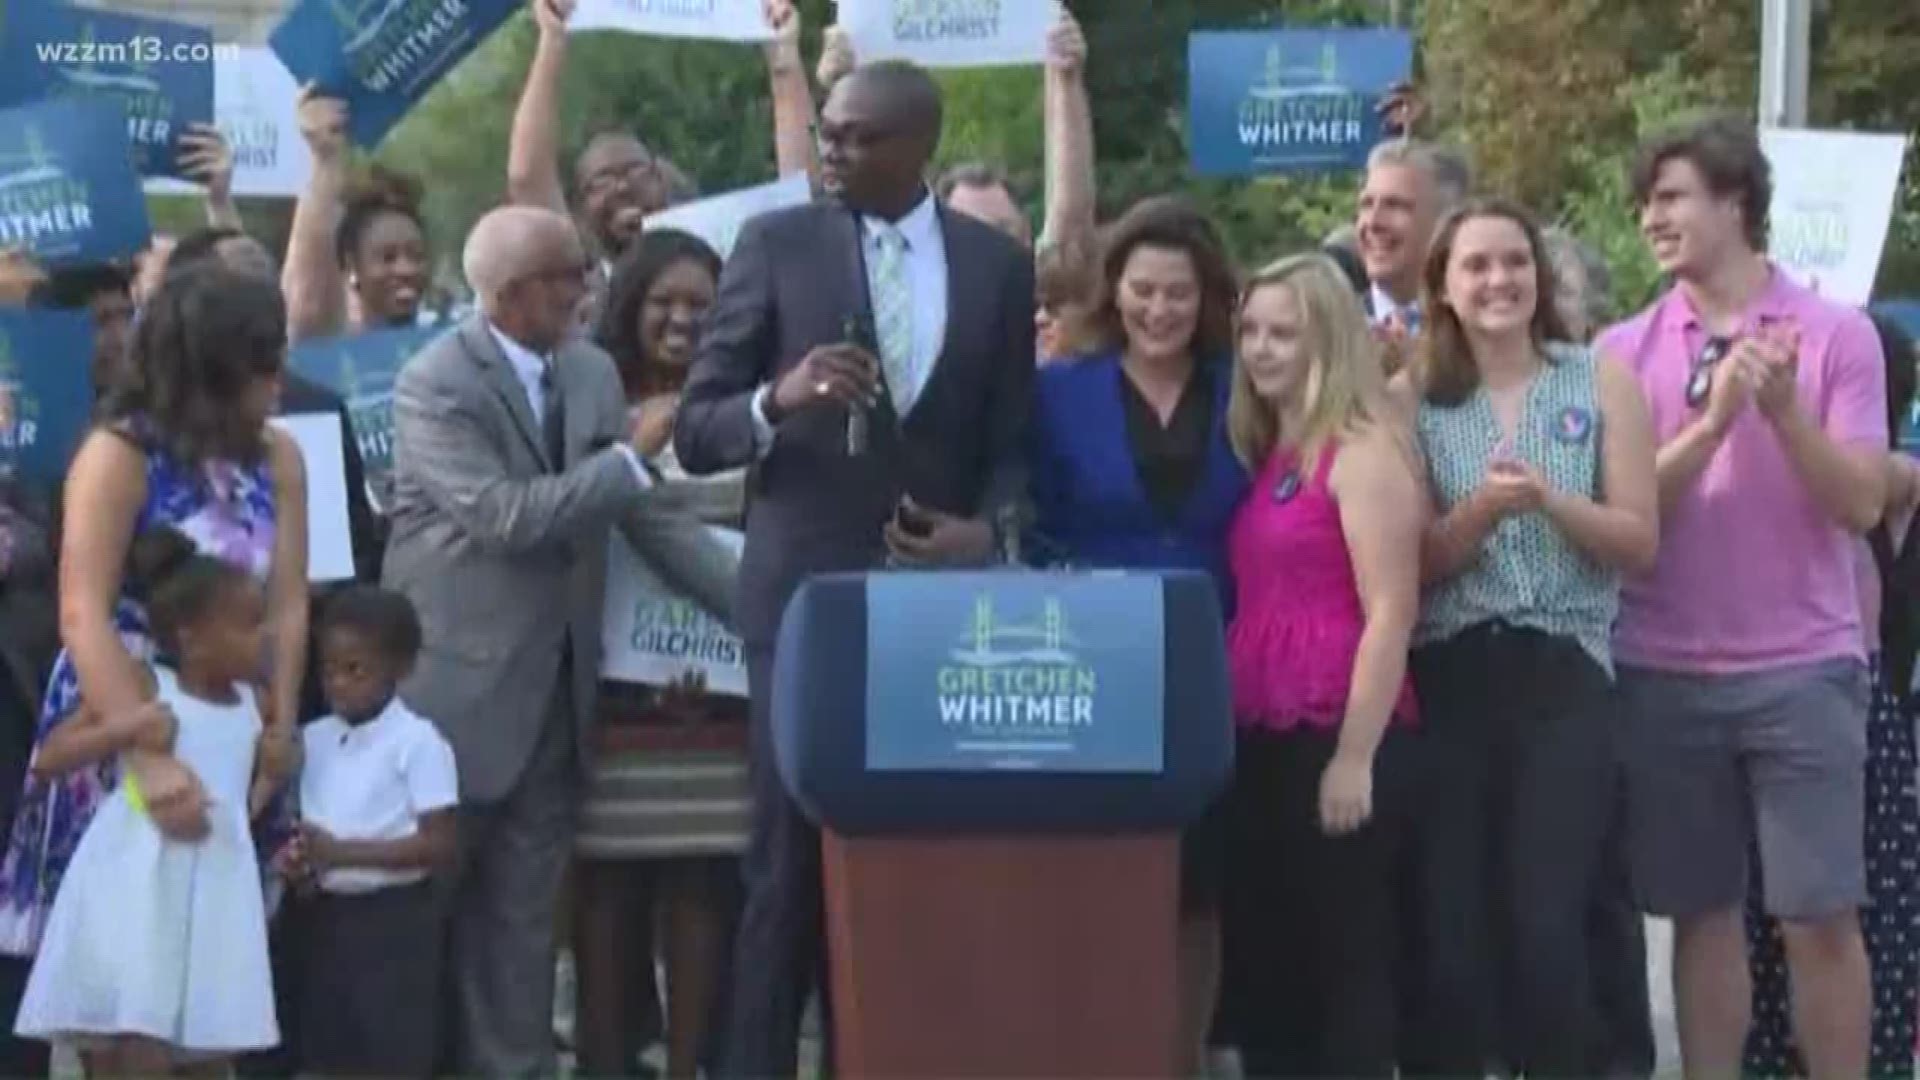 Whitmer announces running mate for governor campaign